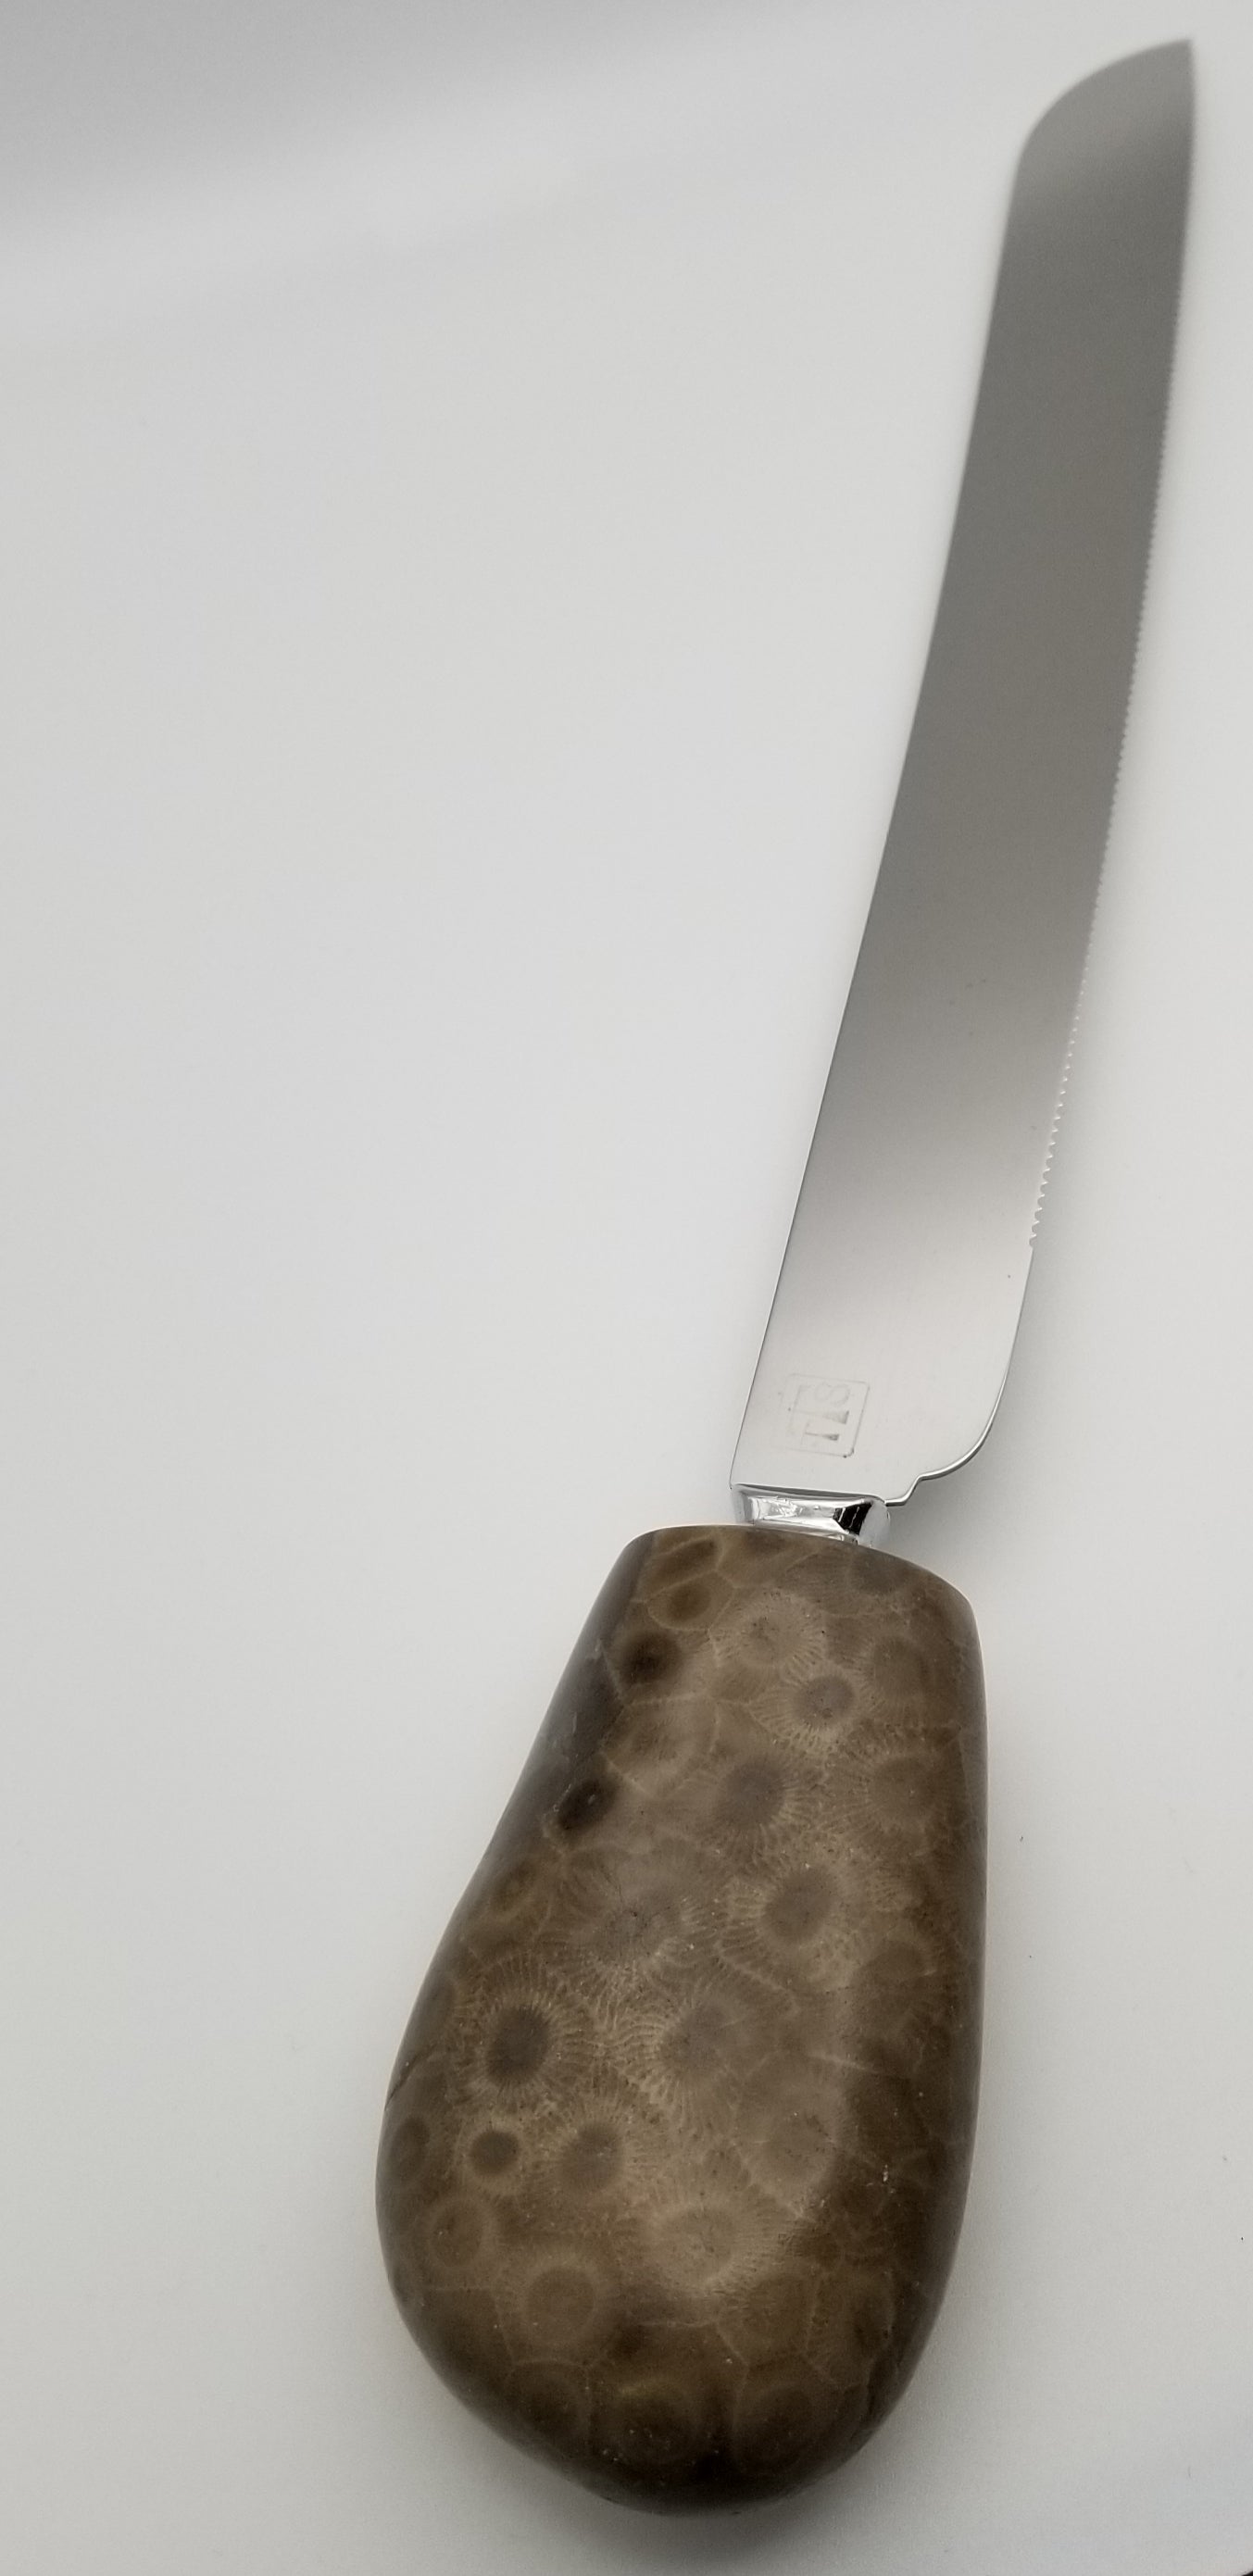 Serrated stainless steel kitchen knife with petoskey stone handle. Fully polished Petoskey stone handle.